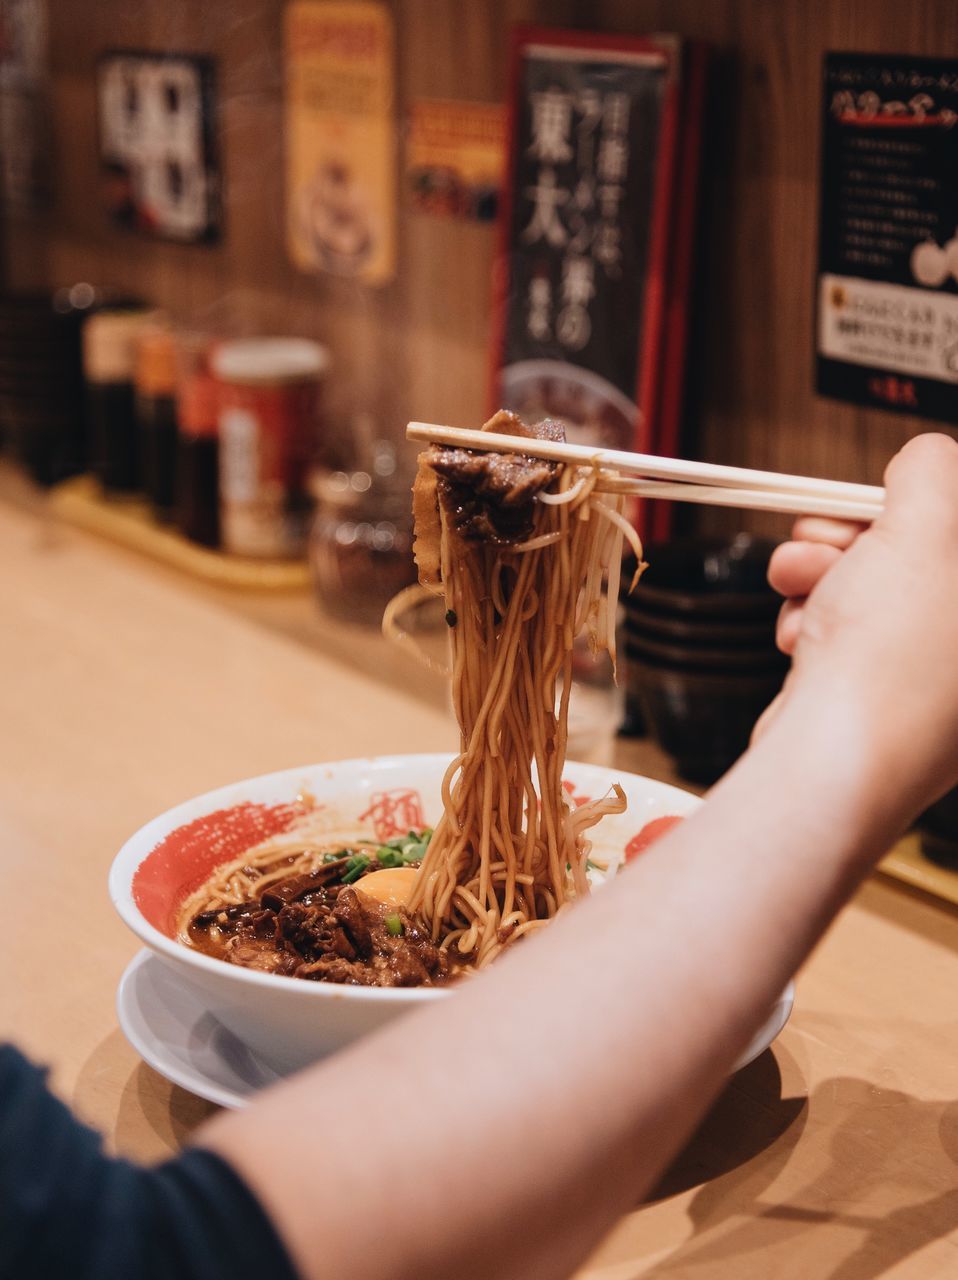 human hand, hand, holding, real people, food, food and drink, human body part, one person, lifestyles, leisure activity, indoors, chopsticks, freshness, selective focus, women, bowl, adult, table, unrecognizable person, finger, japanese food